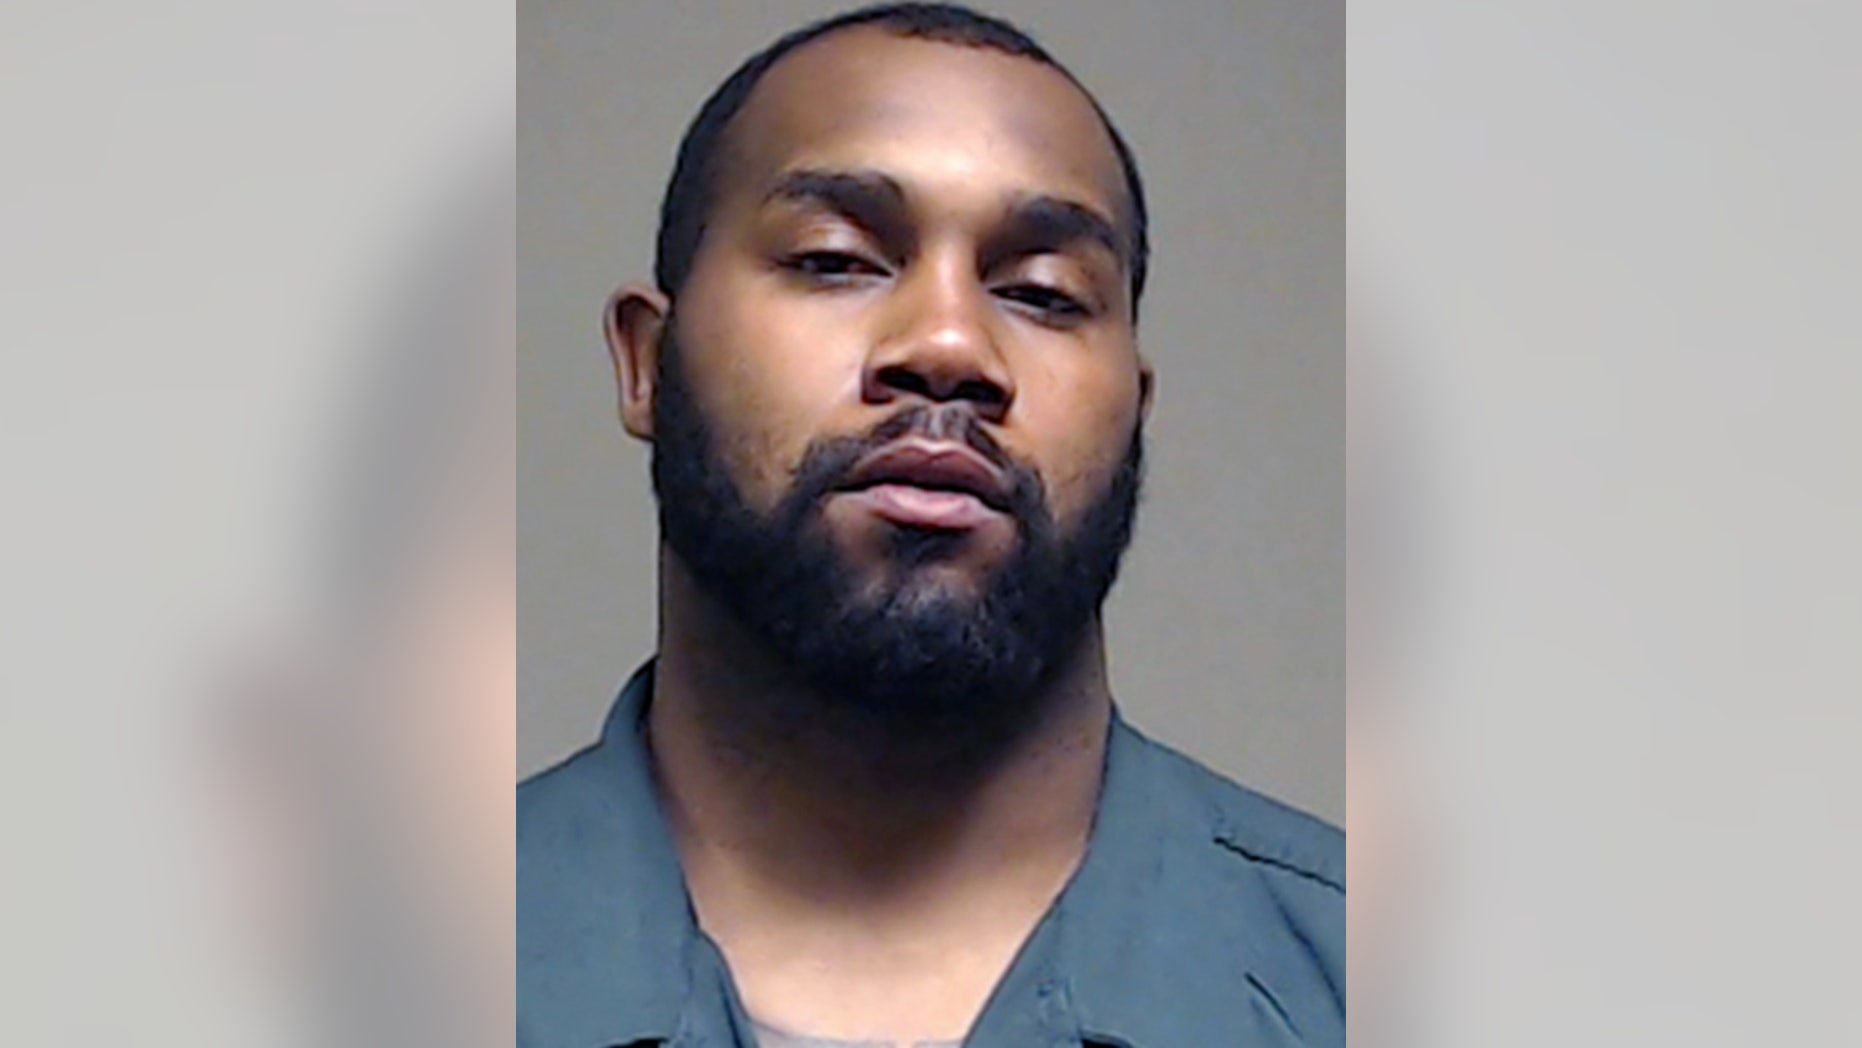 Ex-NFL running back Darren McFadden arrested after found passed out at Whataburger drive-thru, reports say